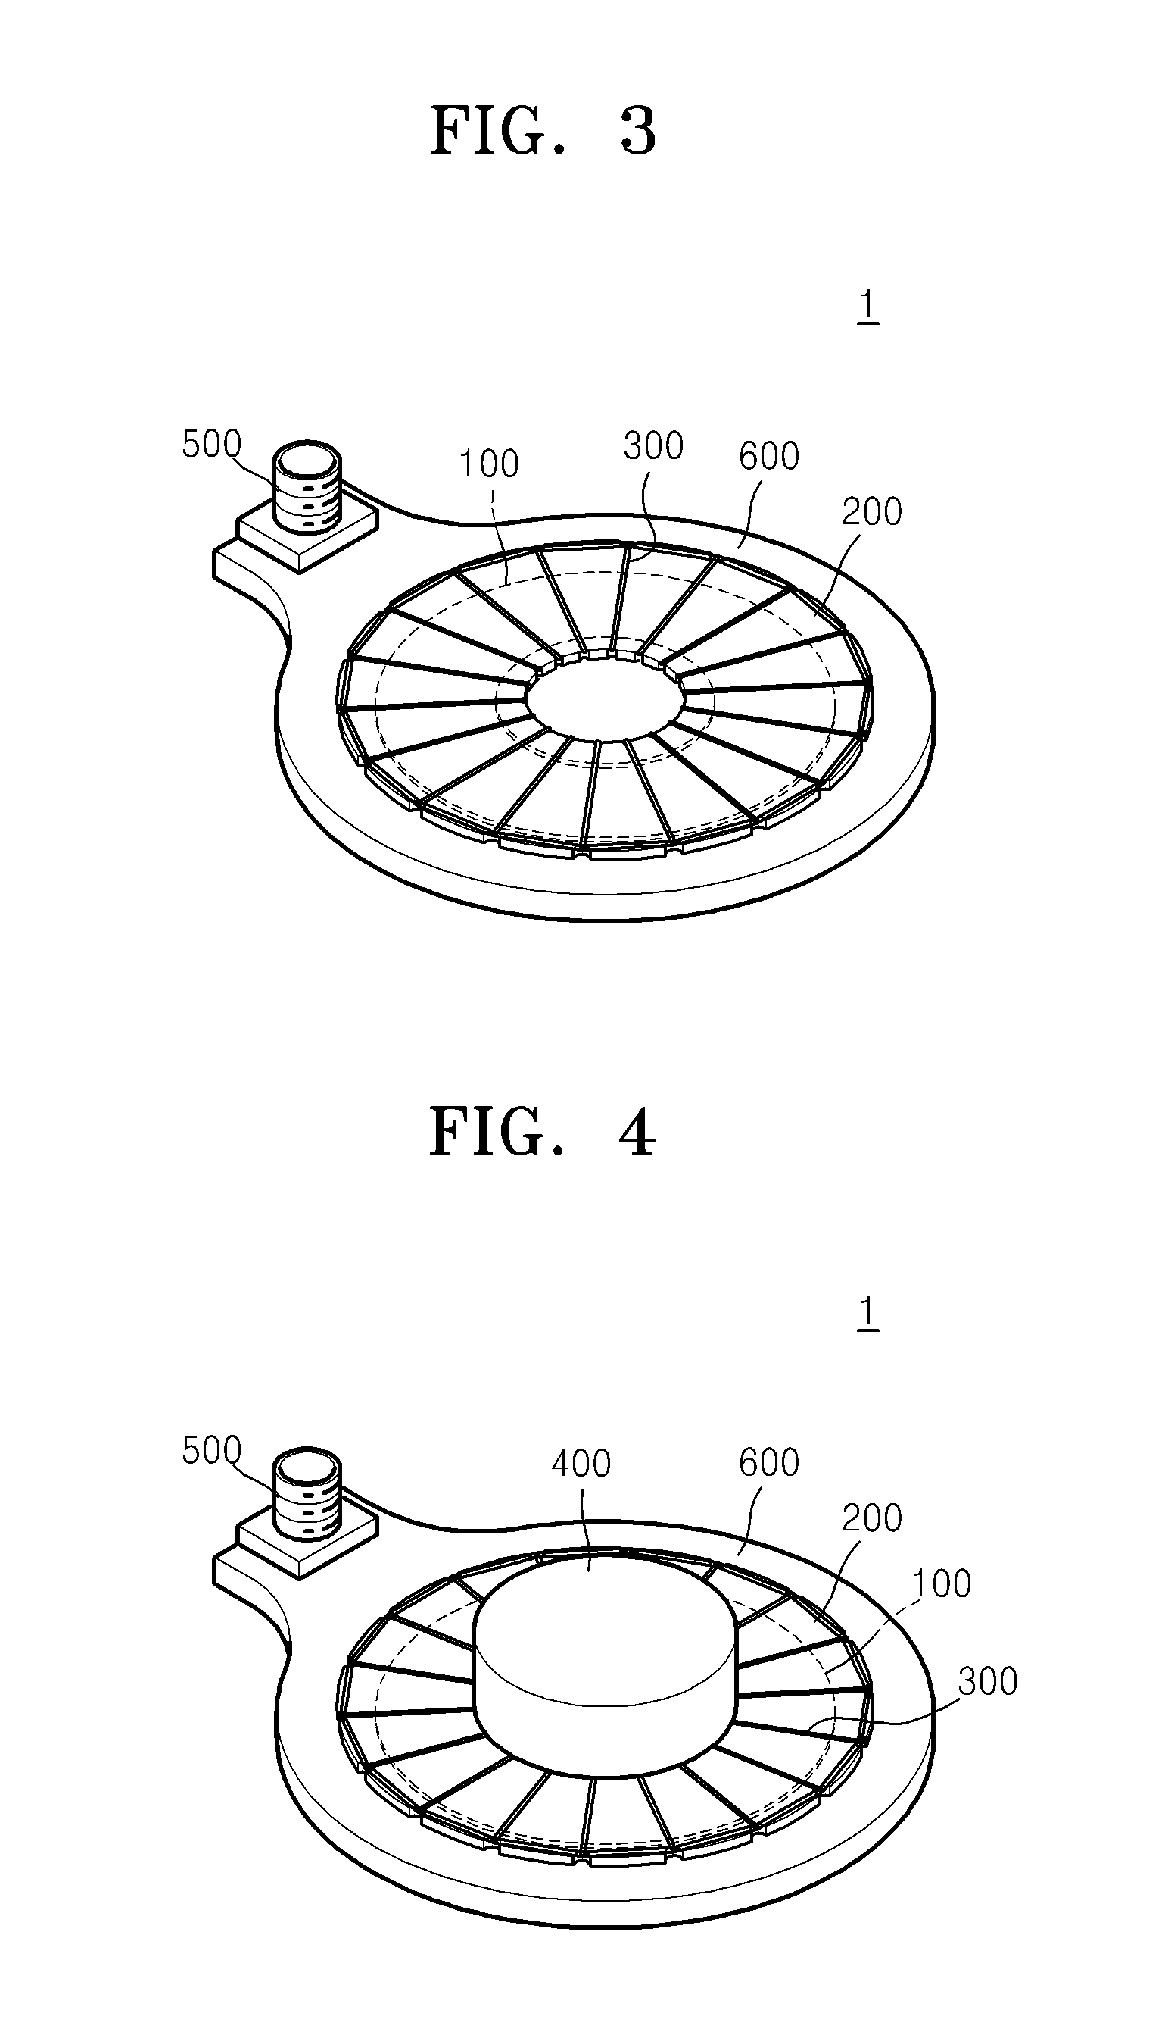 Omni-directional shear-horizontal wave magnetostrictive patch transducer and method of winding coil